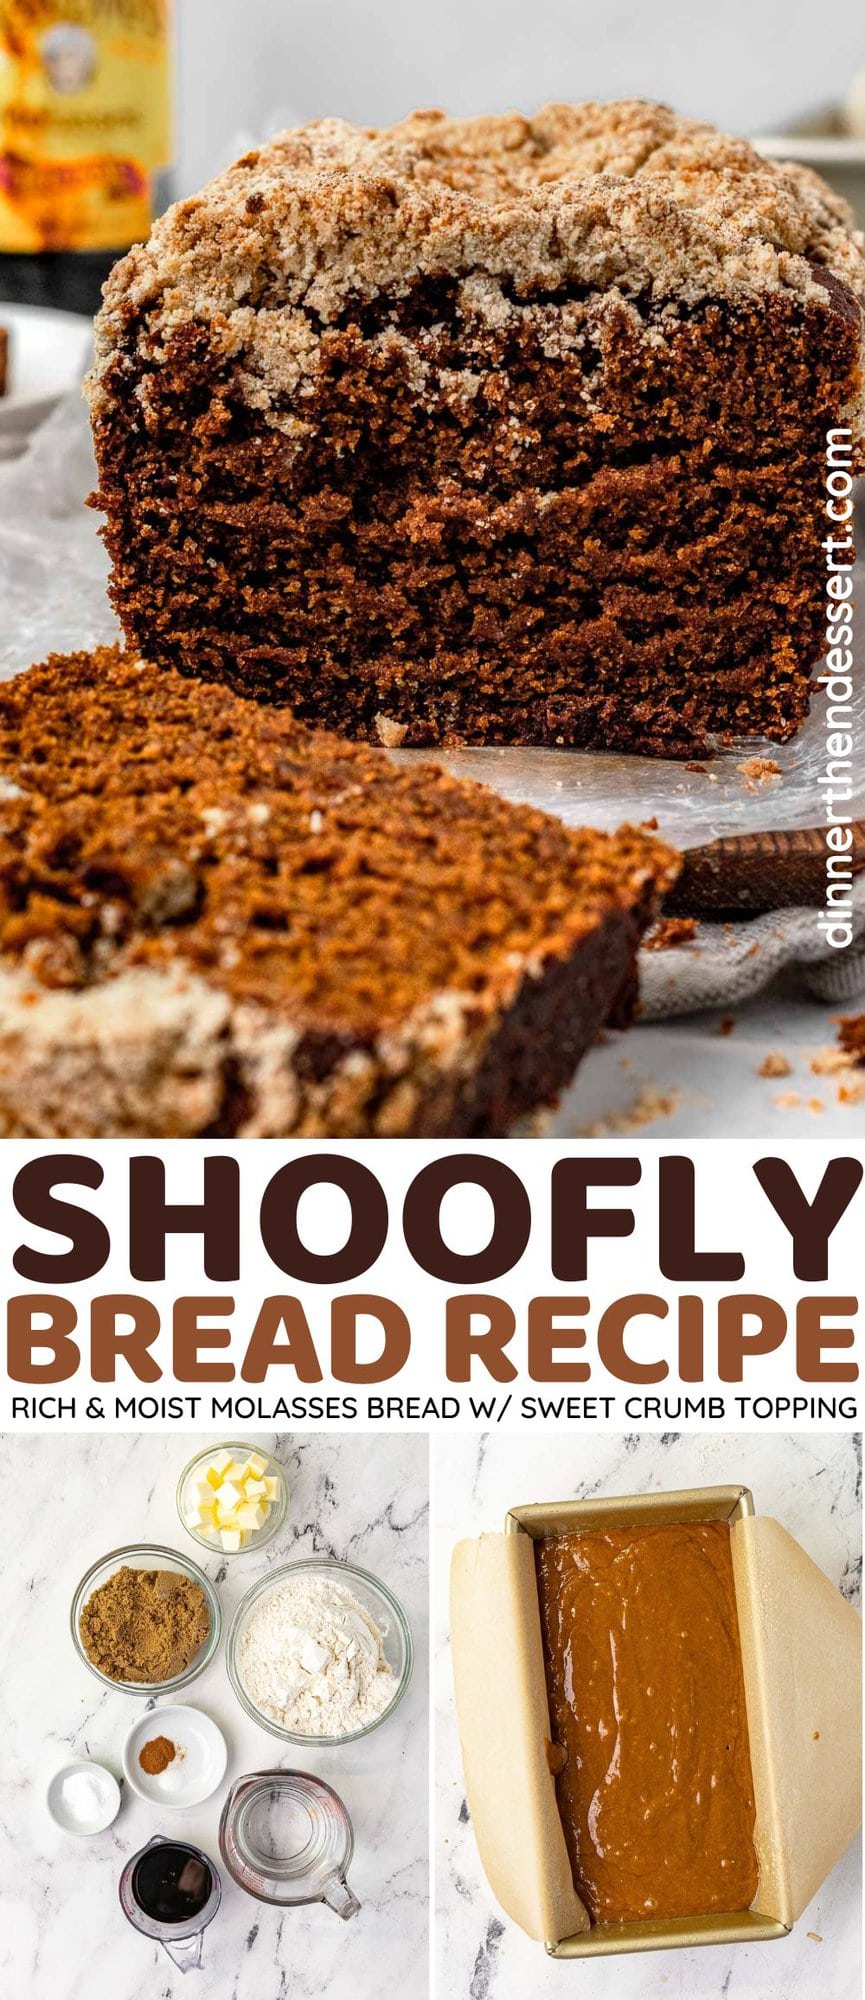 Shoofly Bread baked and sliced, slice sitting next to loaf and preparation collage